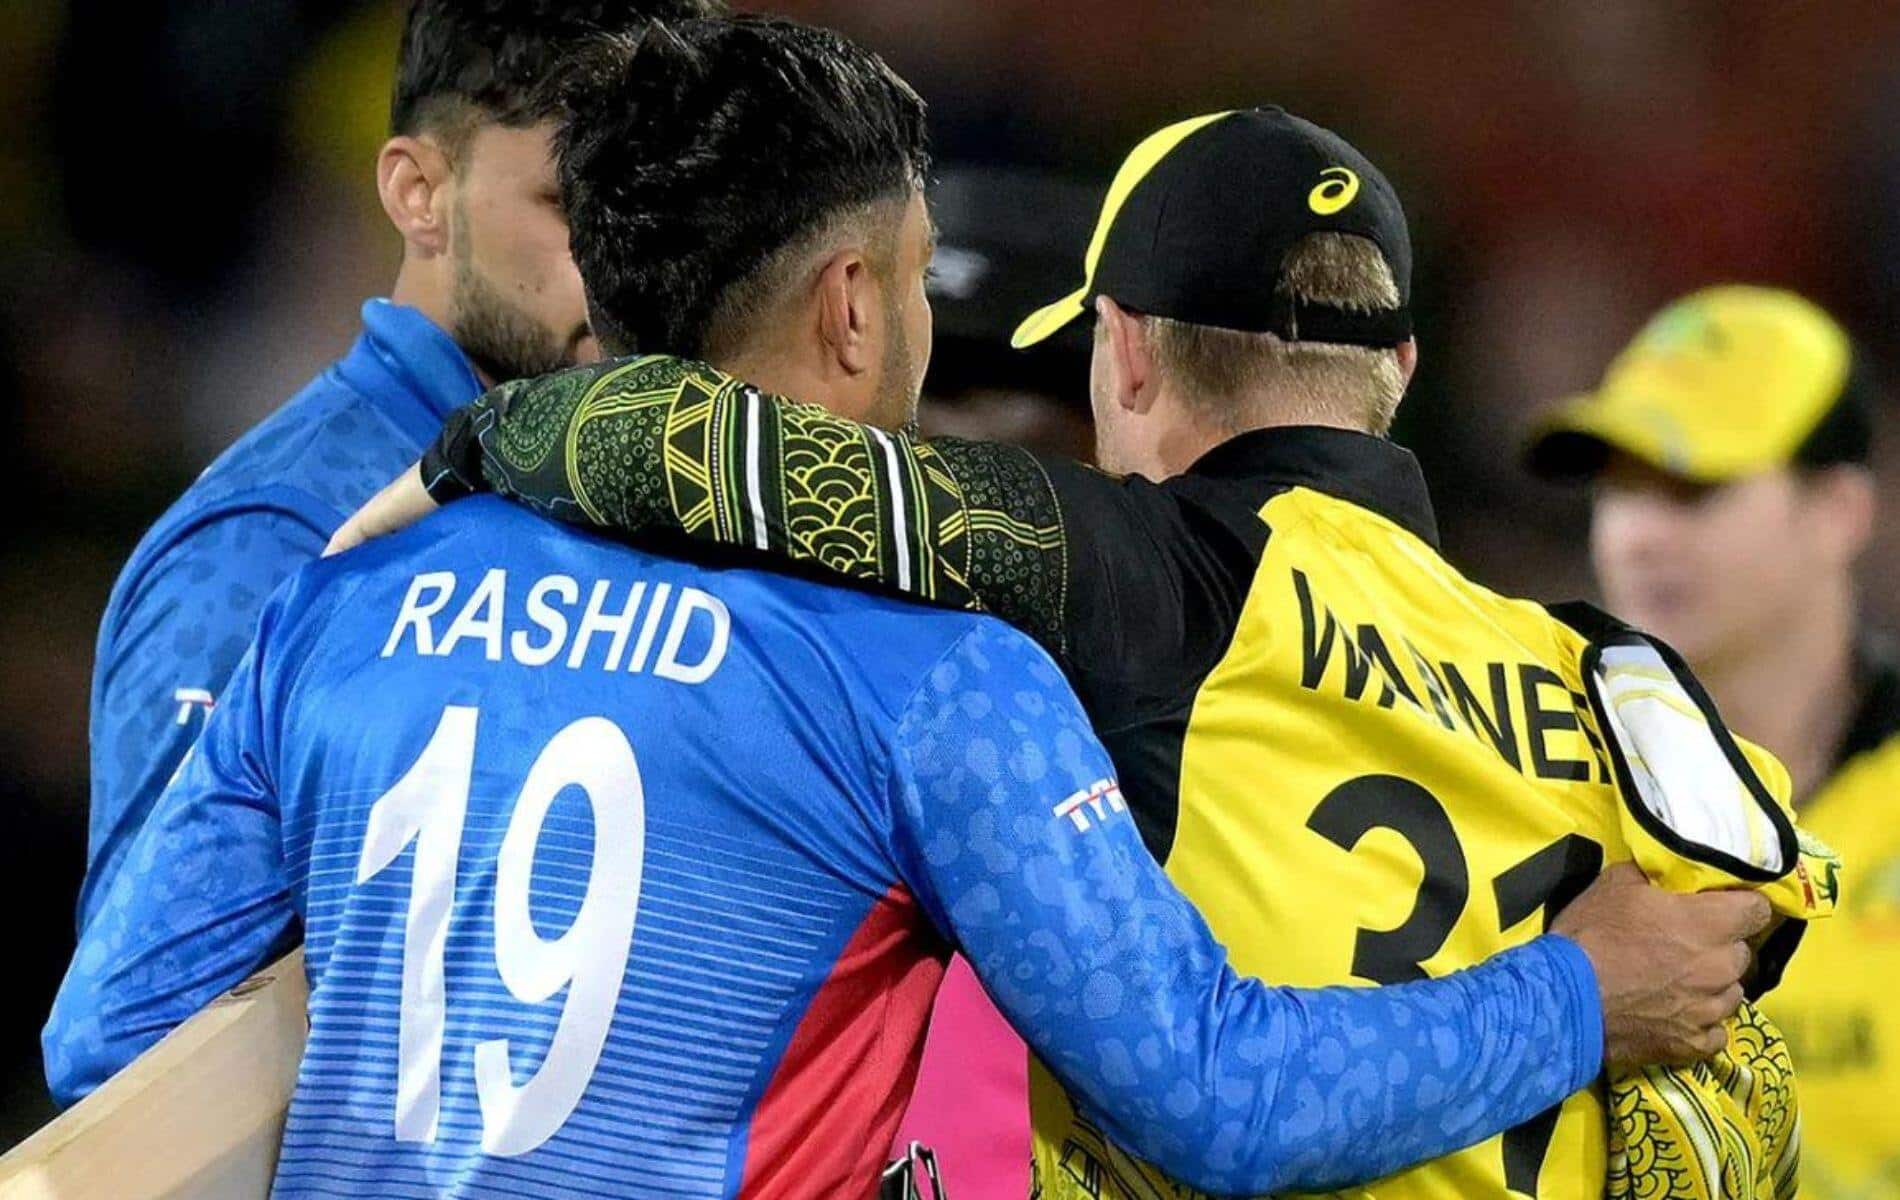 Afghanistan will face Australia in Super 8 round of T20 WC tomorrow (X)